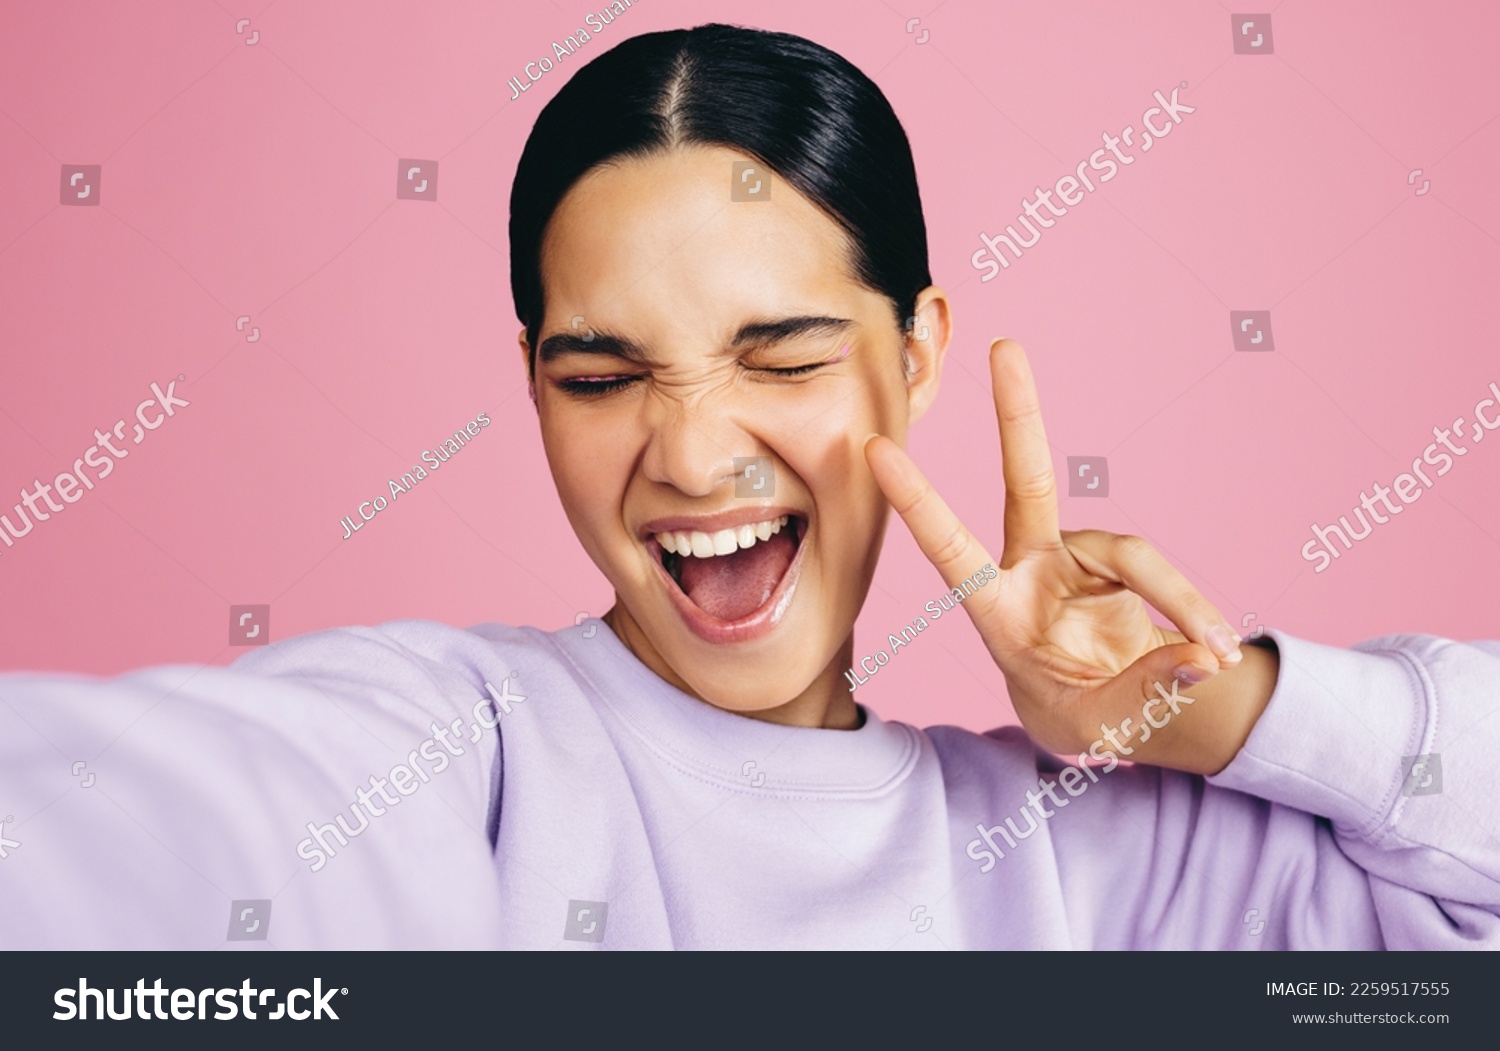 Excited young woman taking a selfie in a studio, she makes a peace sign with an expression of joy on her face. Woman having fun capturing her moments of self confidence and positivity. #2259517555